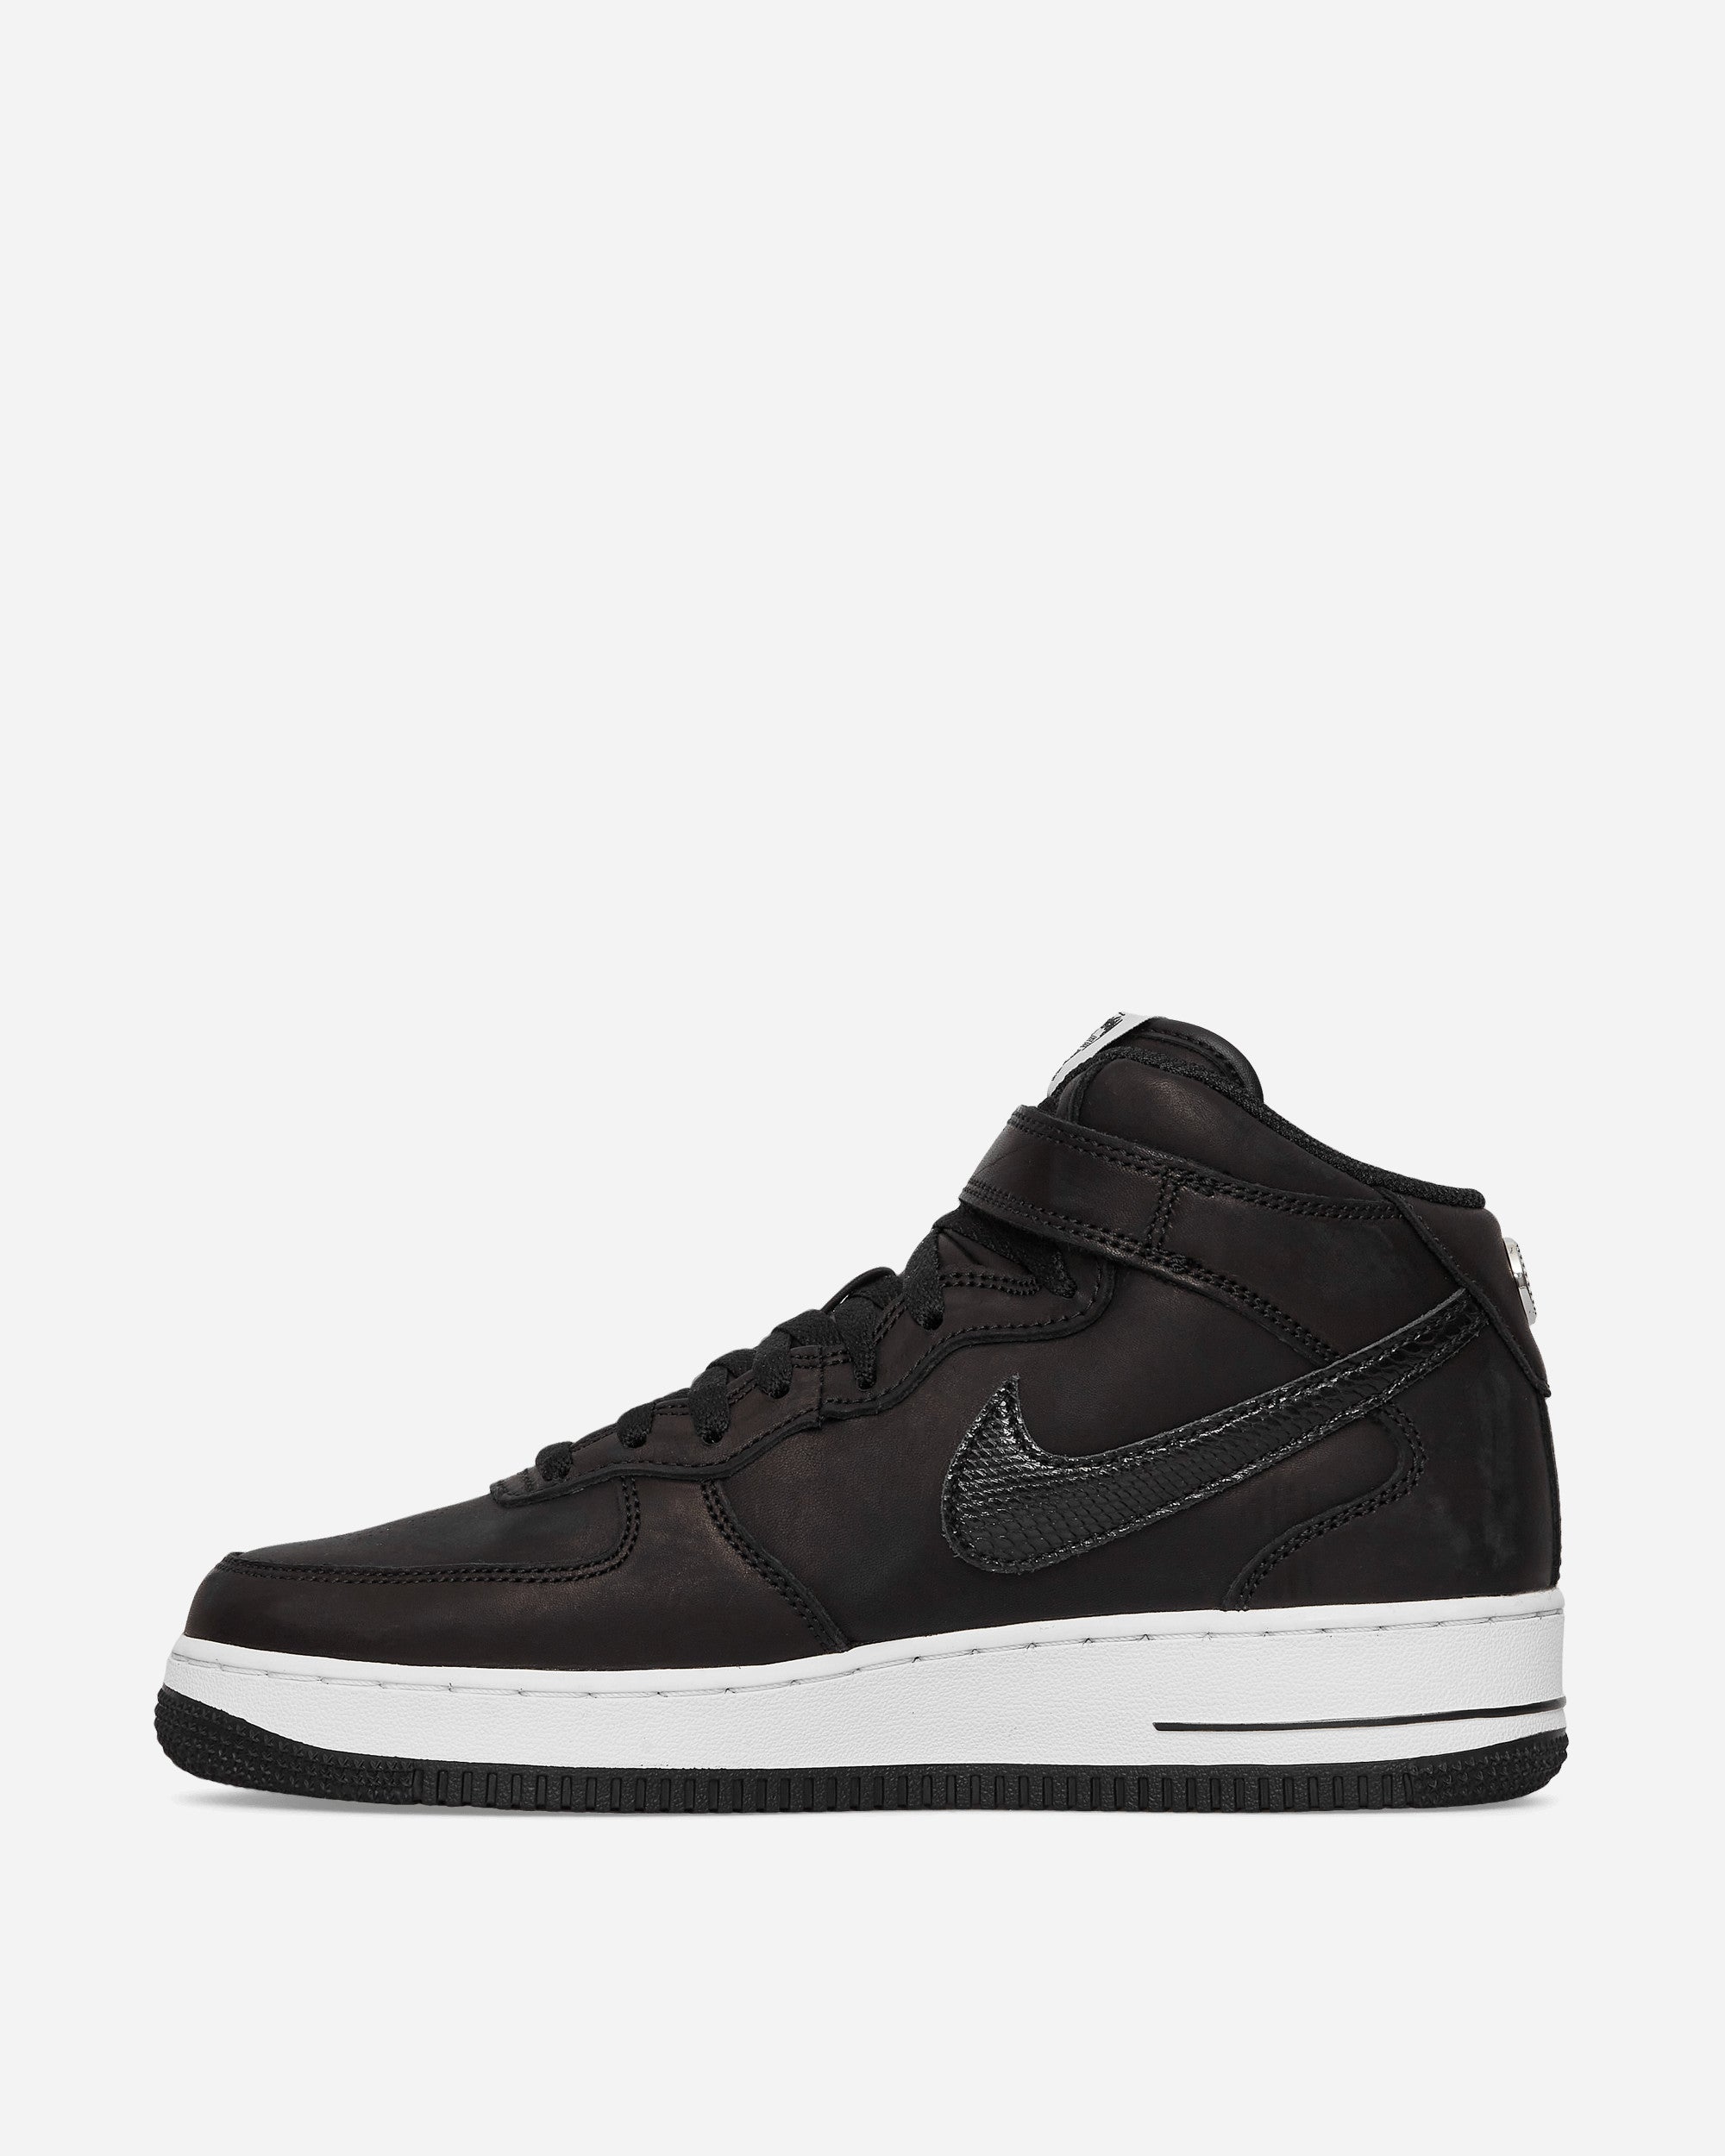 Nike Special Project Air Force 1 07 Mid Sp Black/Black Sneakers Mid DJ7840-001